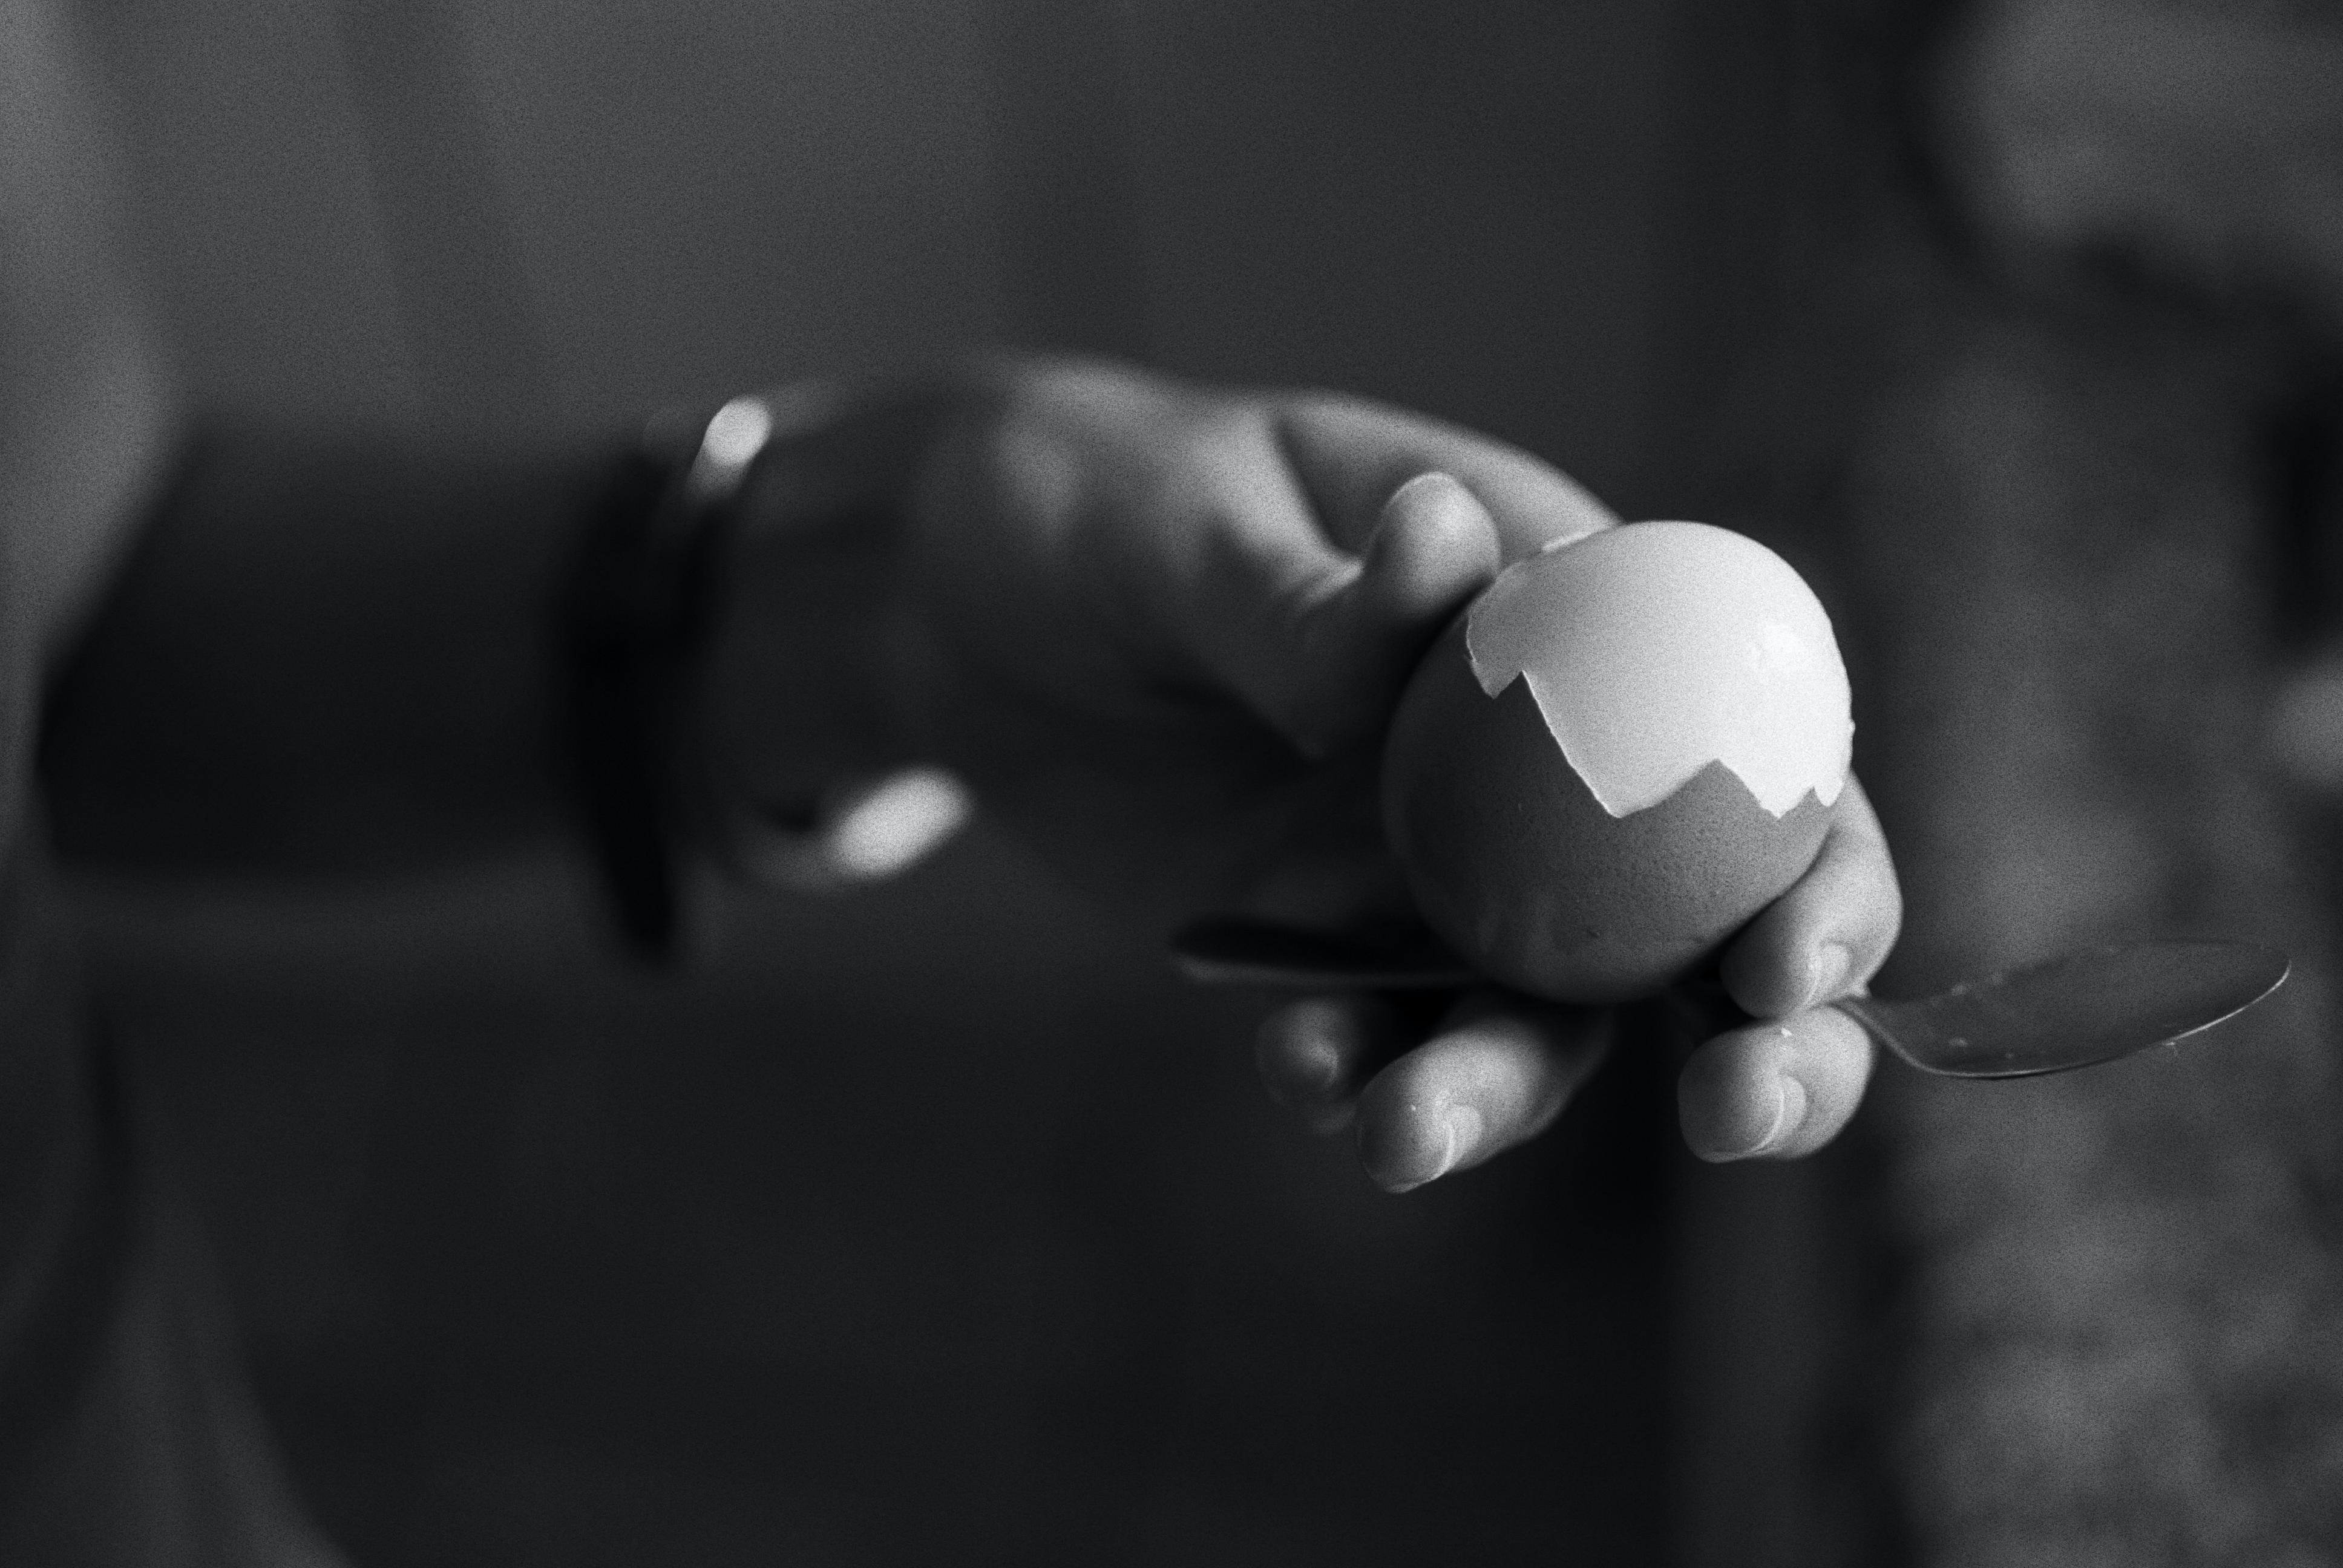 Black and white image of the hand of a woman showing a half-peeled hard egg.